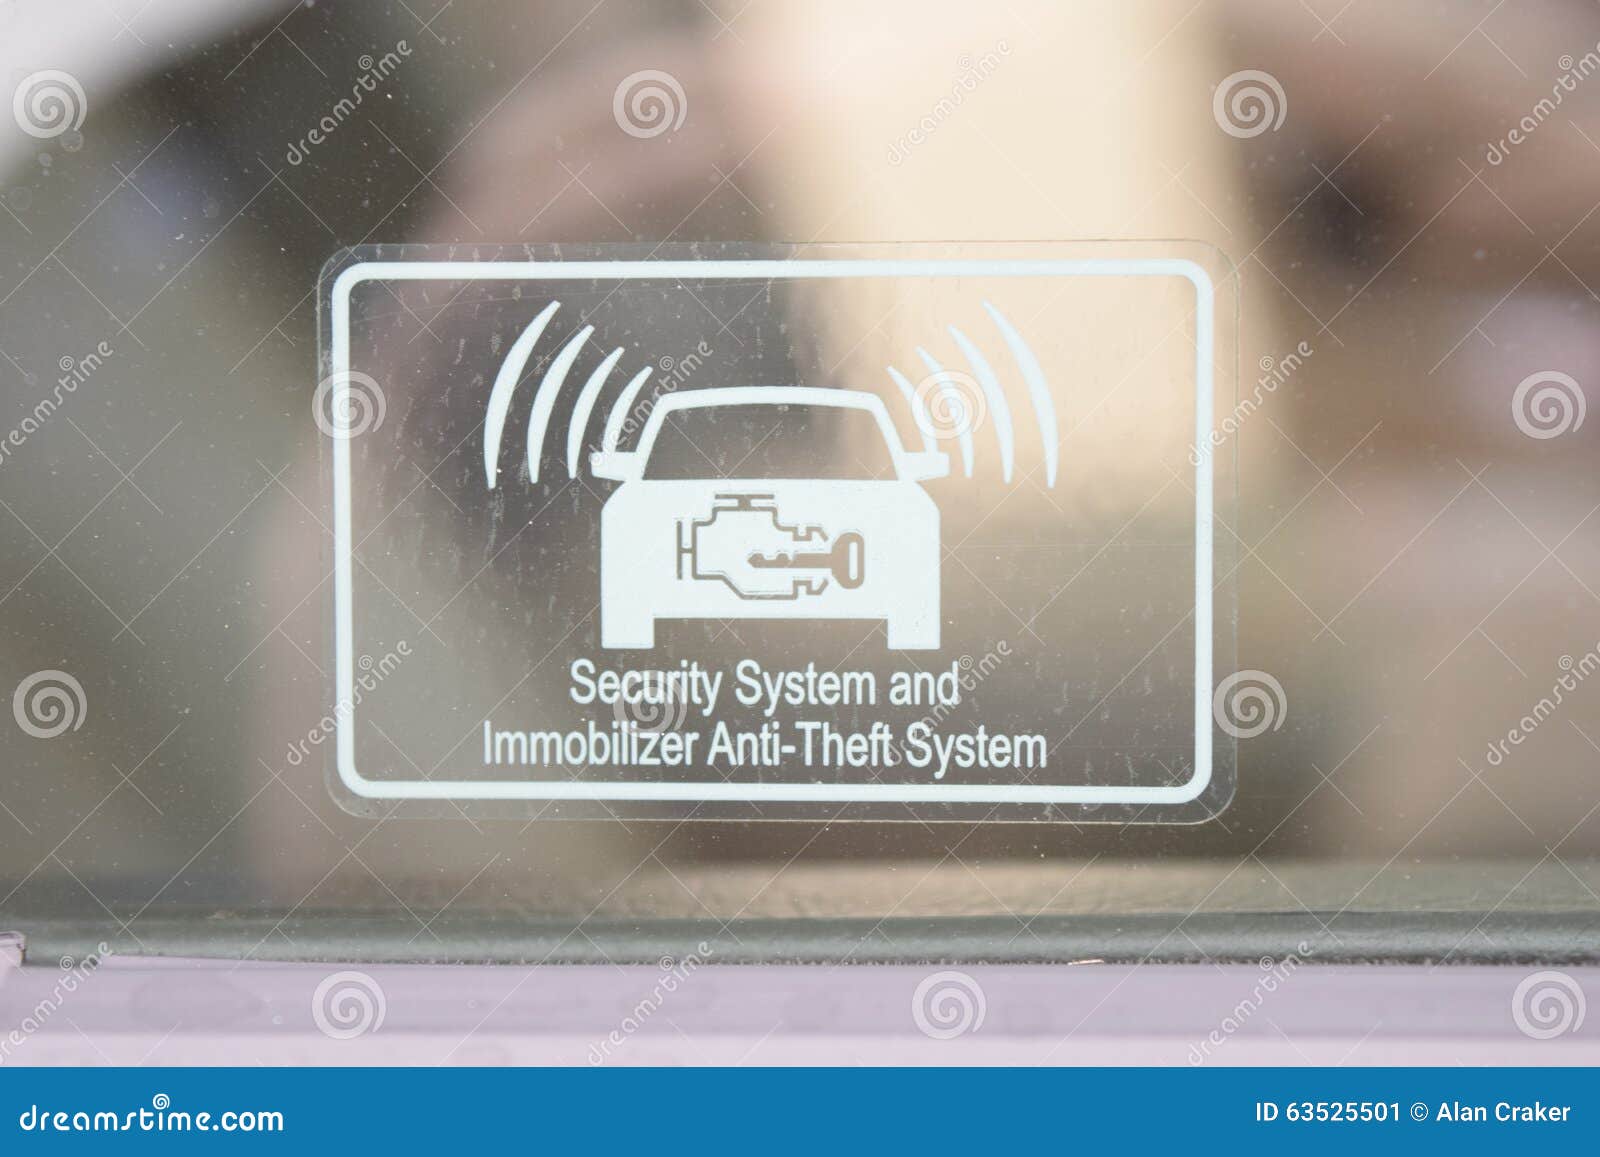 security system and immobilizer anti-theft system